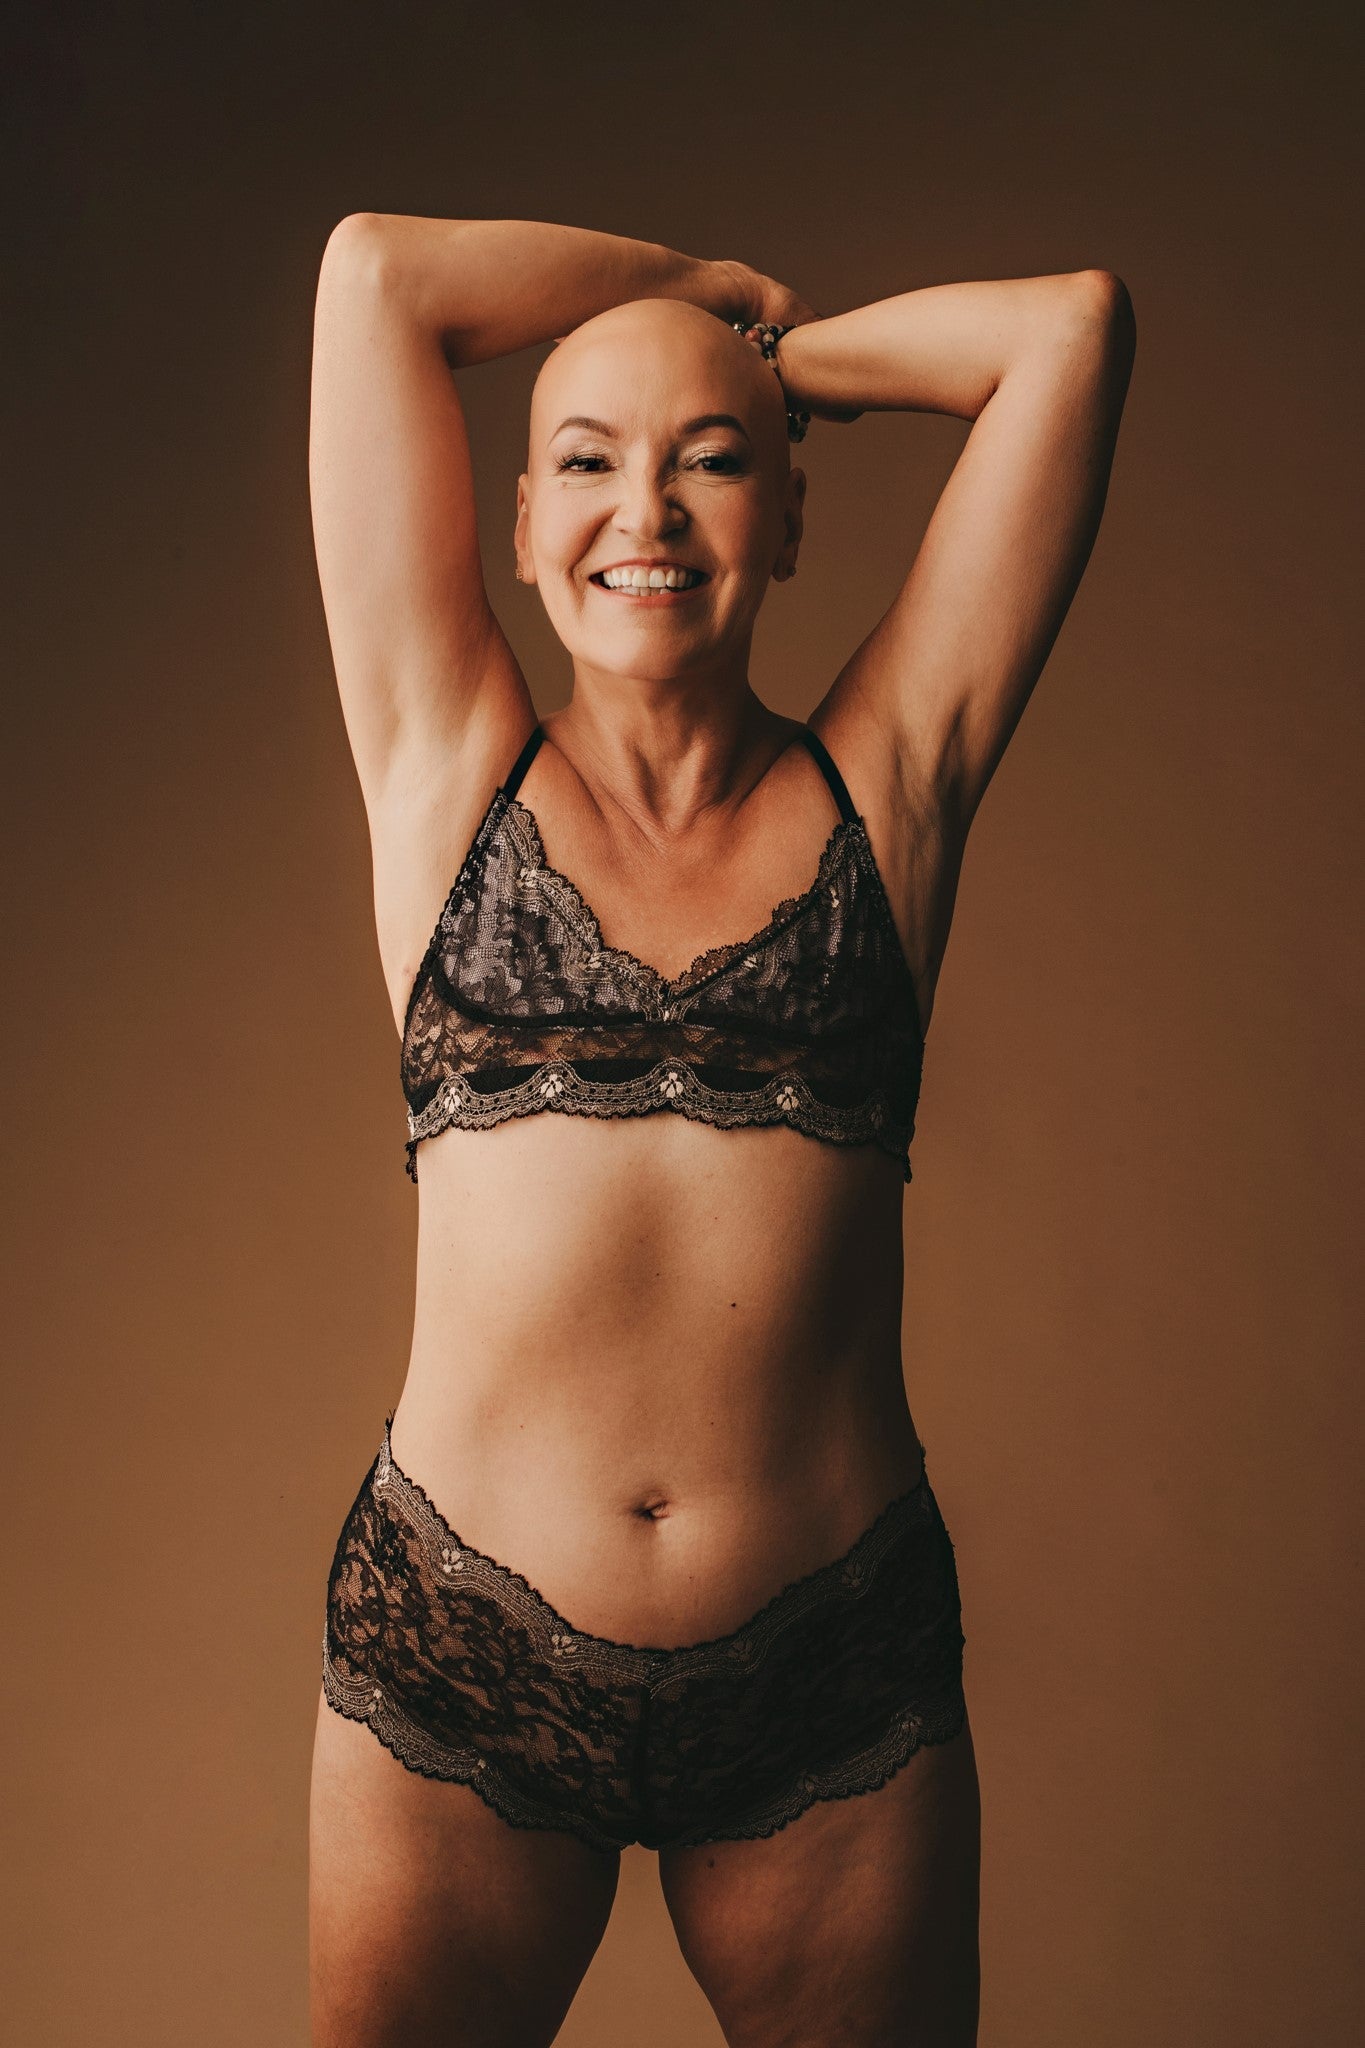 Thriving After Double Mastectomy - Written by Ellyn Winters